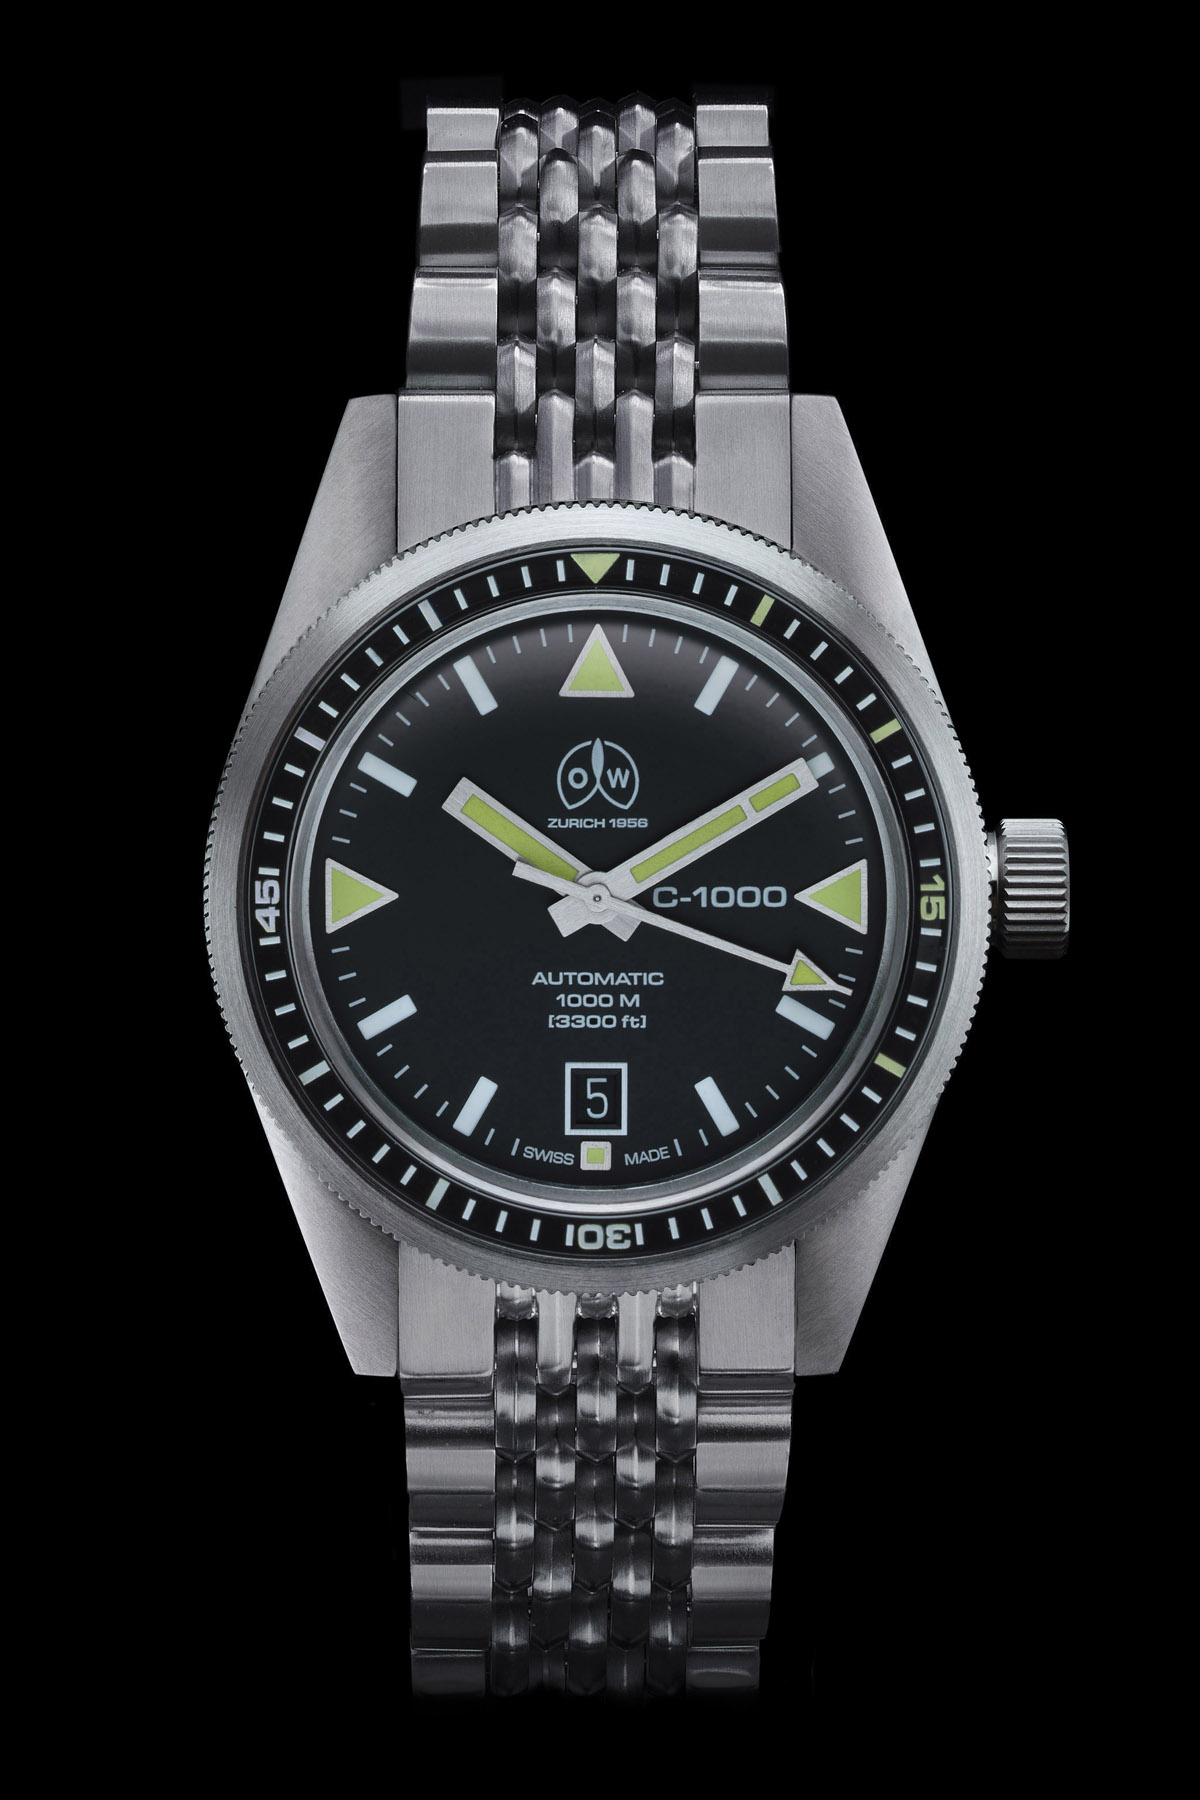 OW C-1000 - Tribute Ollech and Wajs Caribbean 1000 Dive Watch